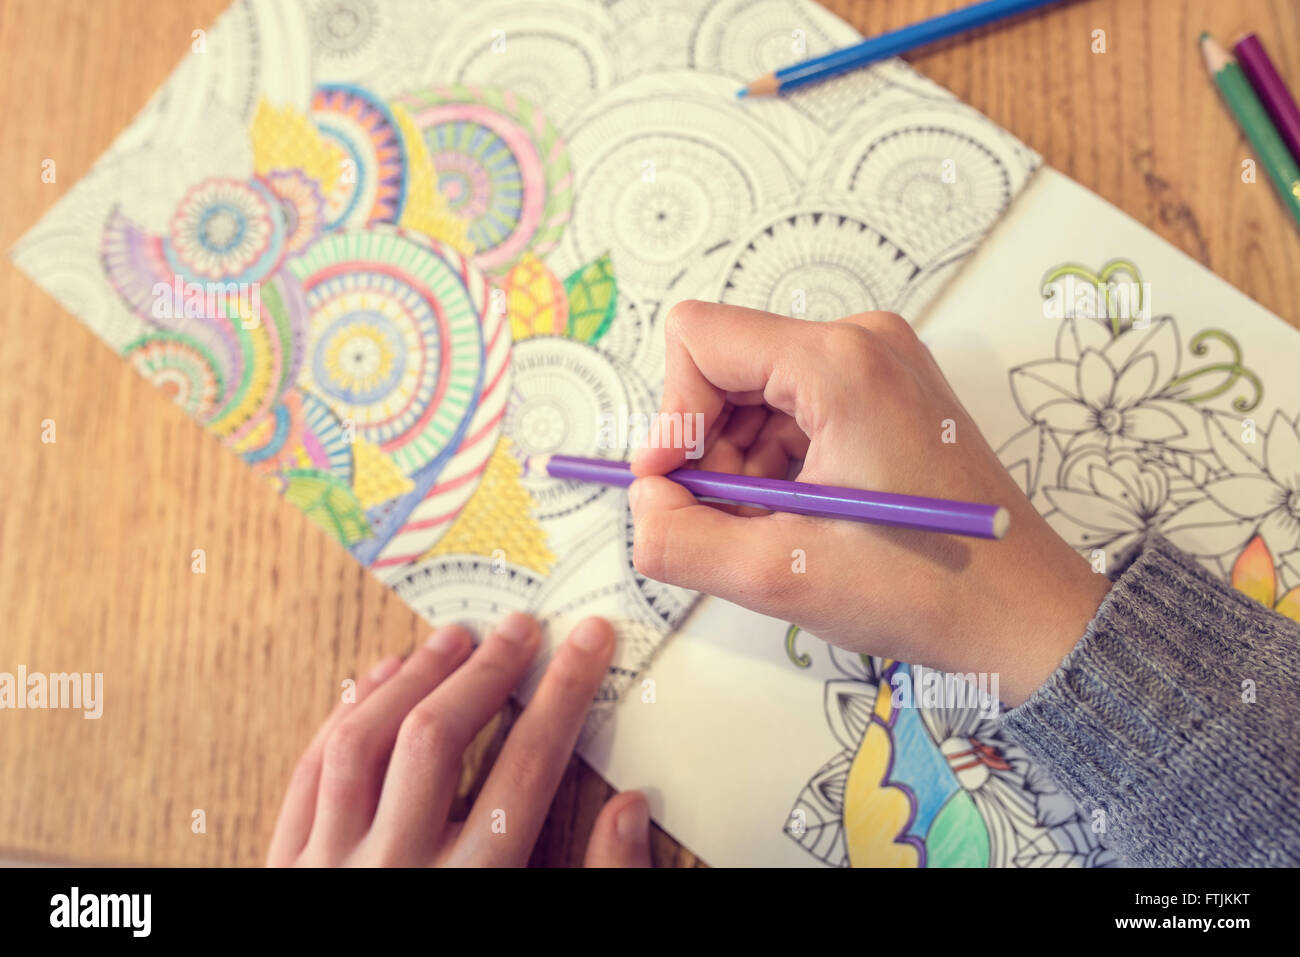 Paint Coloring Book Stock Photo